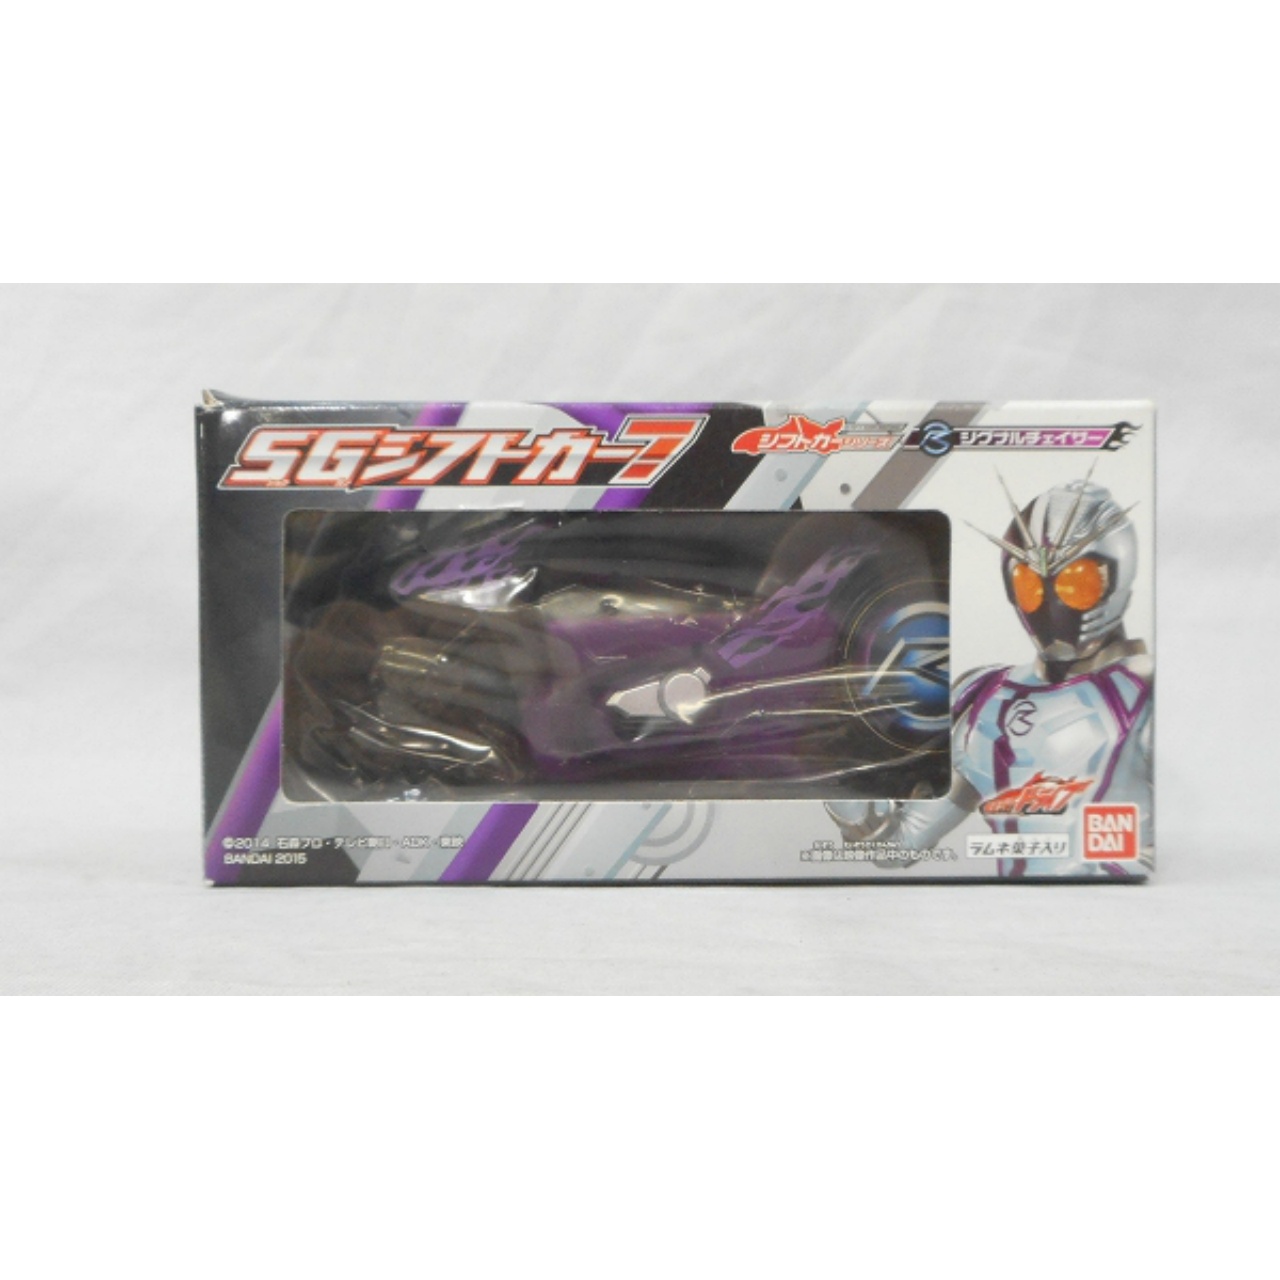 Masked Rider Drive SG Shift Car vol.7 Candy Toy - Signal Chaser